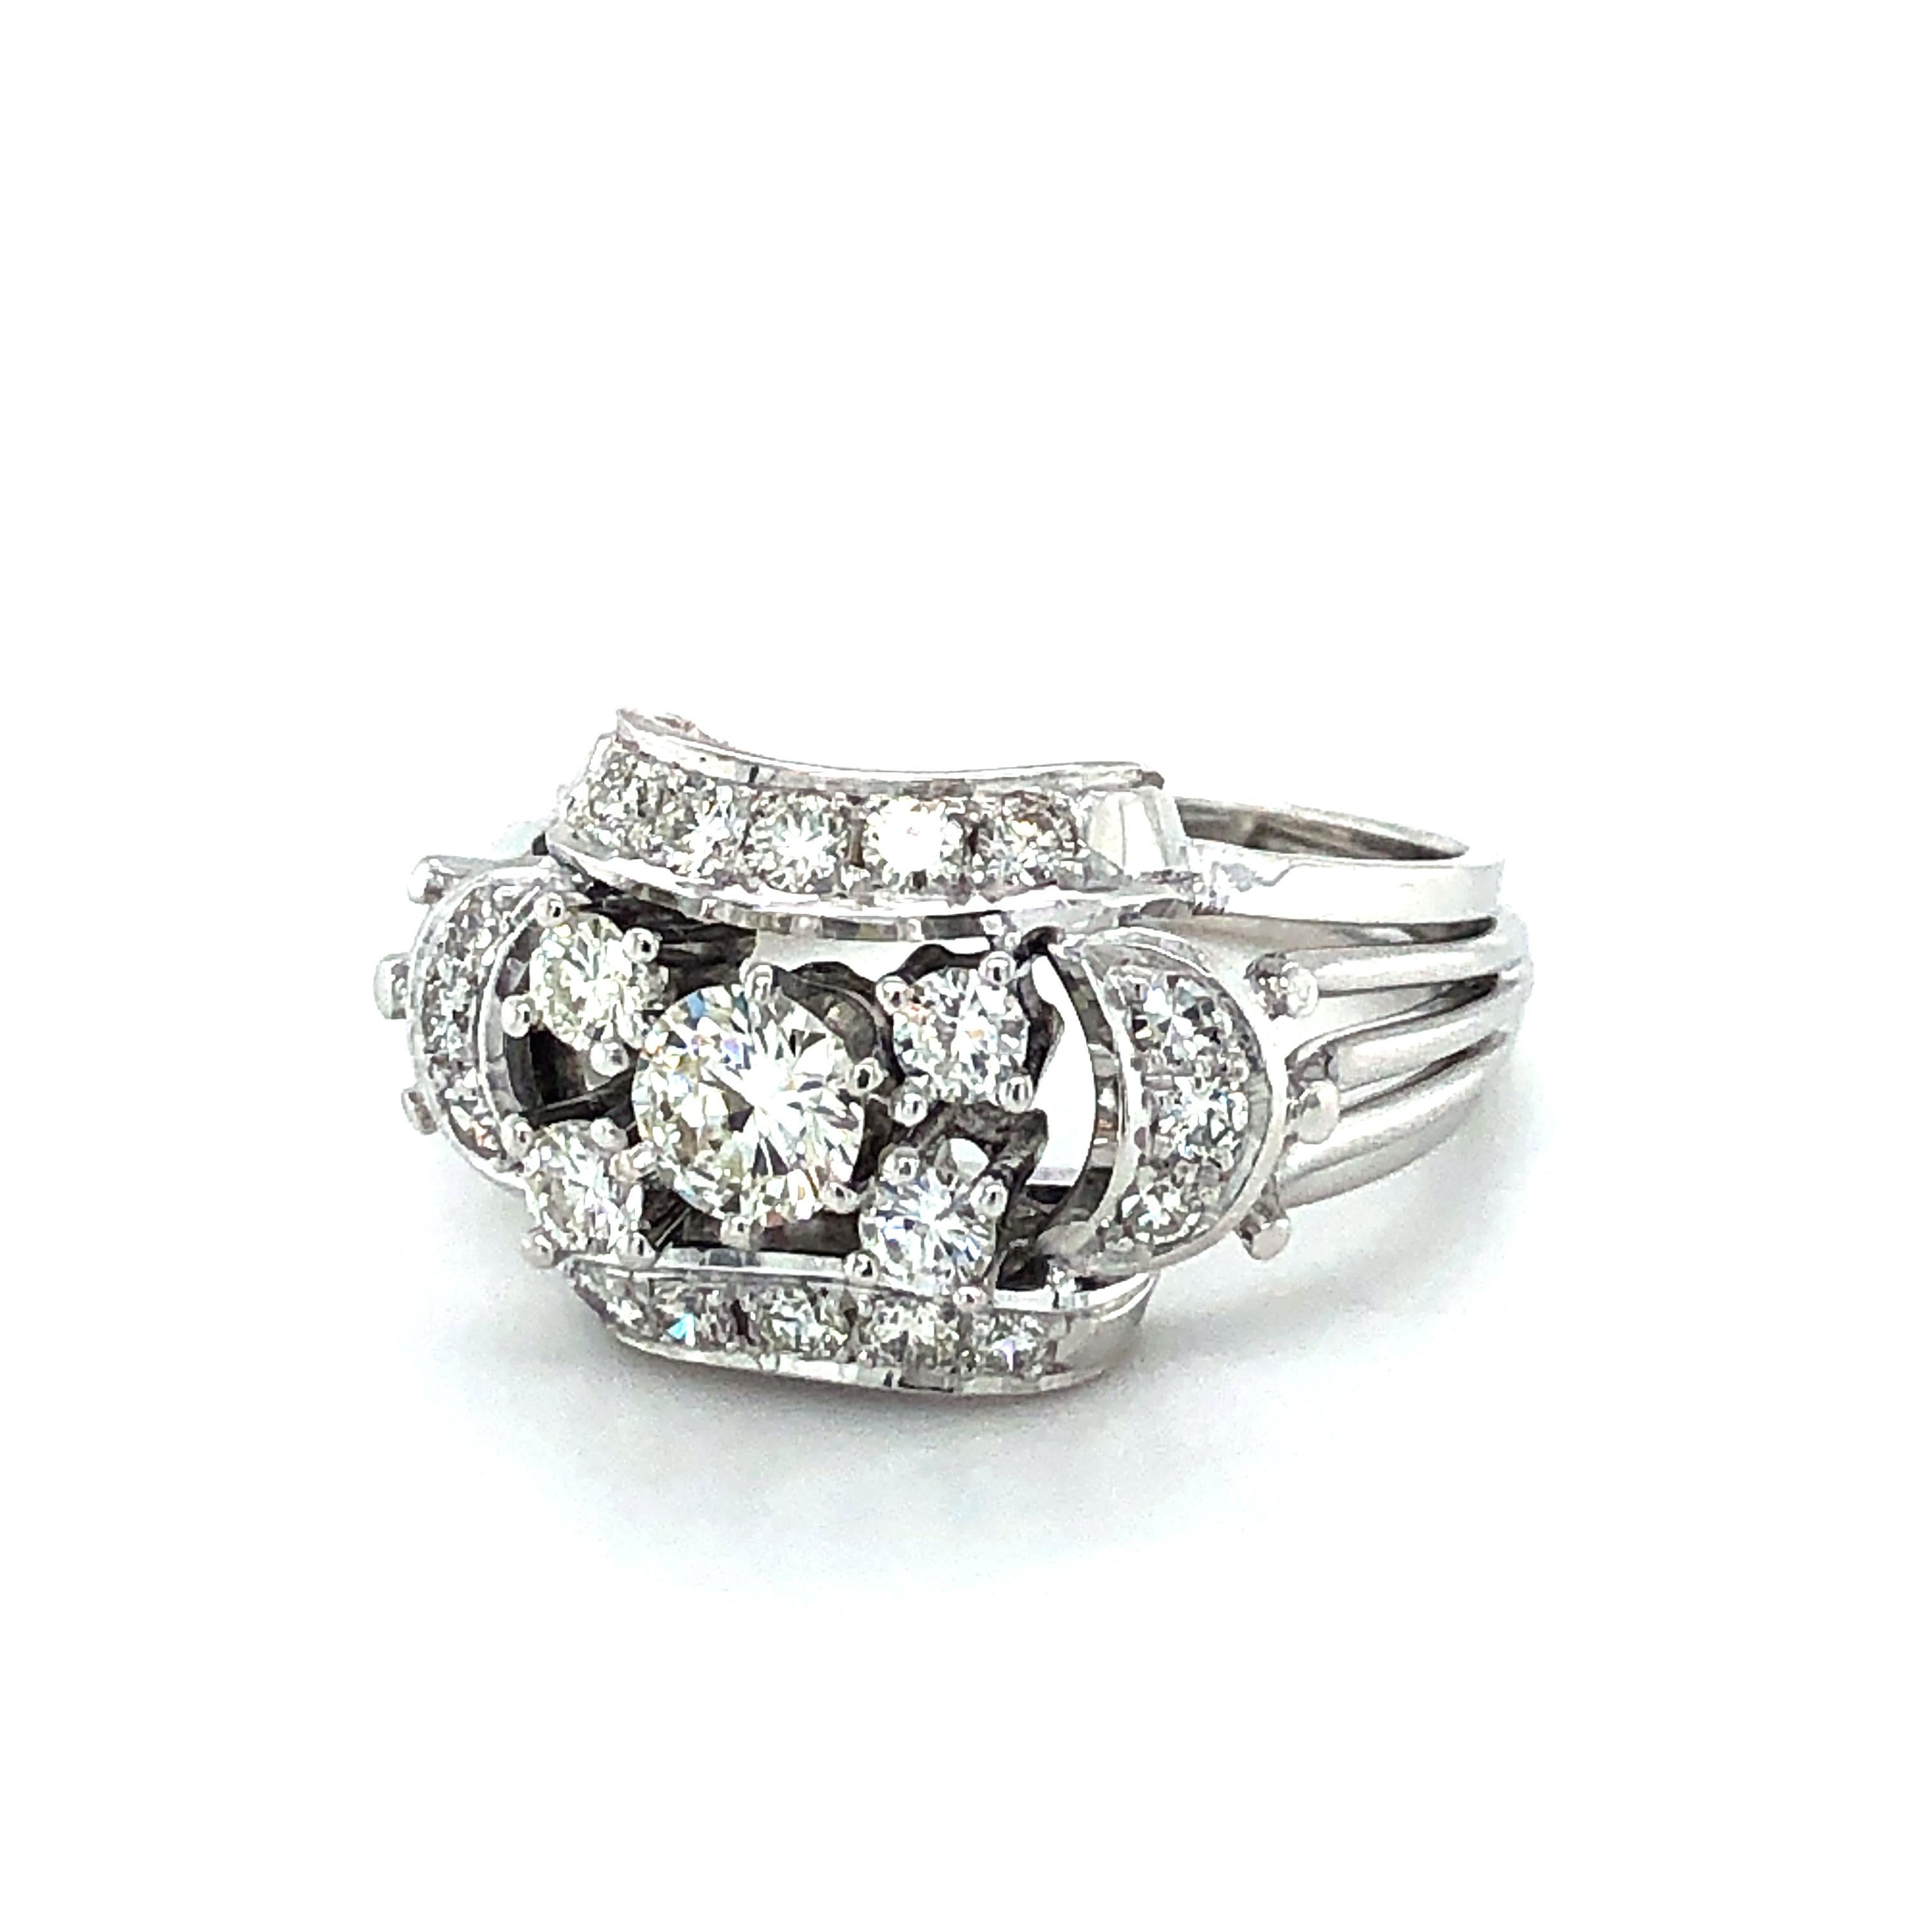 Playful ring in 18 K white gold. Designed as a cluster of five brilliant-cut diamonds; embedded in 16 brilliant-, and single-cut diamonds. The prong set center stone weighs an approximate 0.40 ct and is of G/H-vs quality. The remaining diamonds add